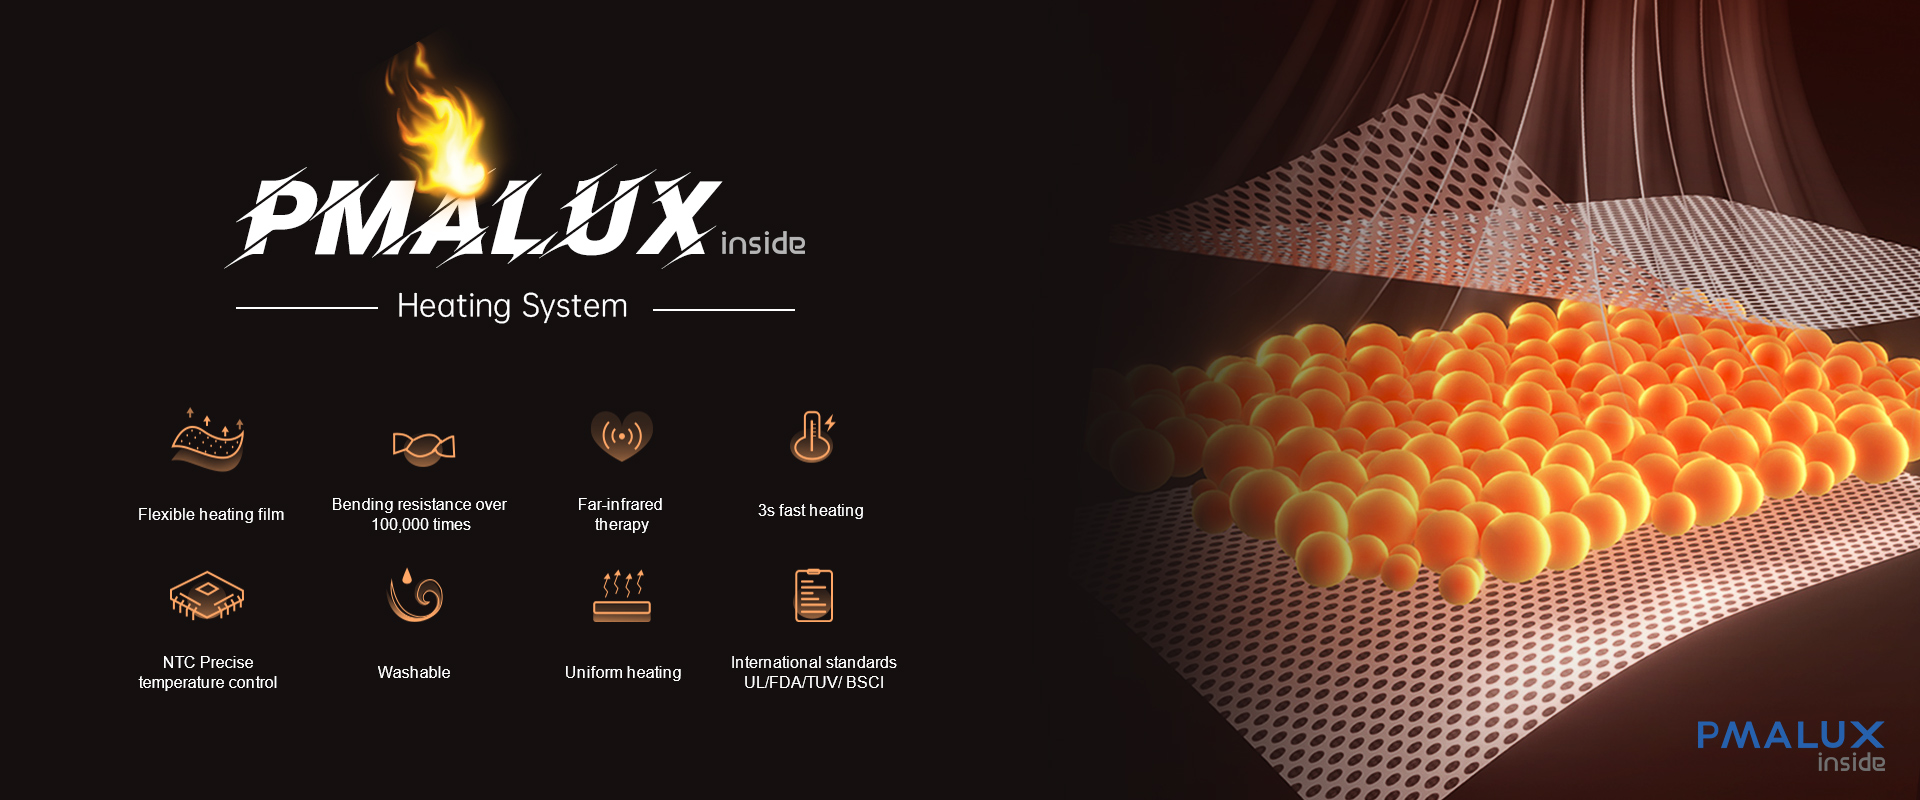 PMAlux Heating System